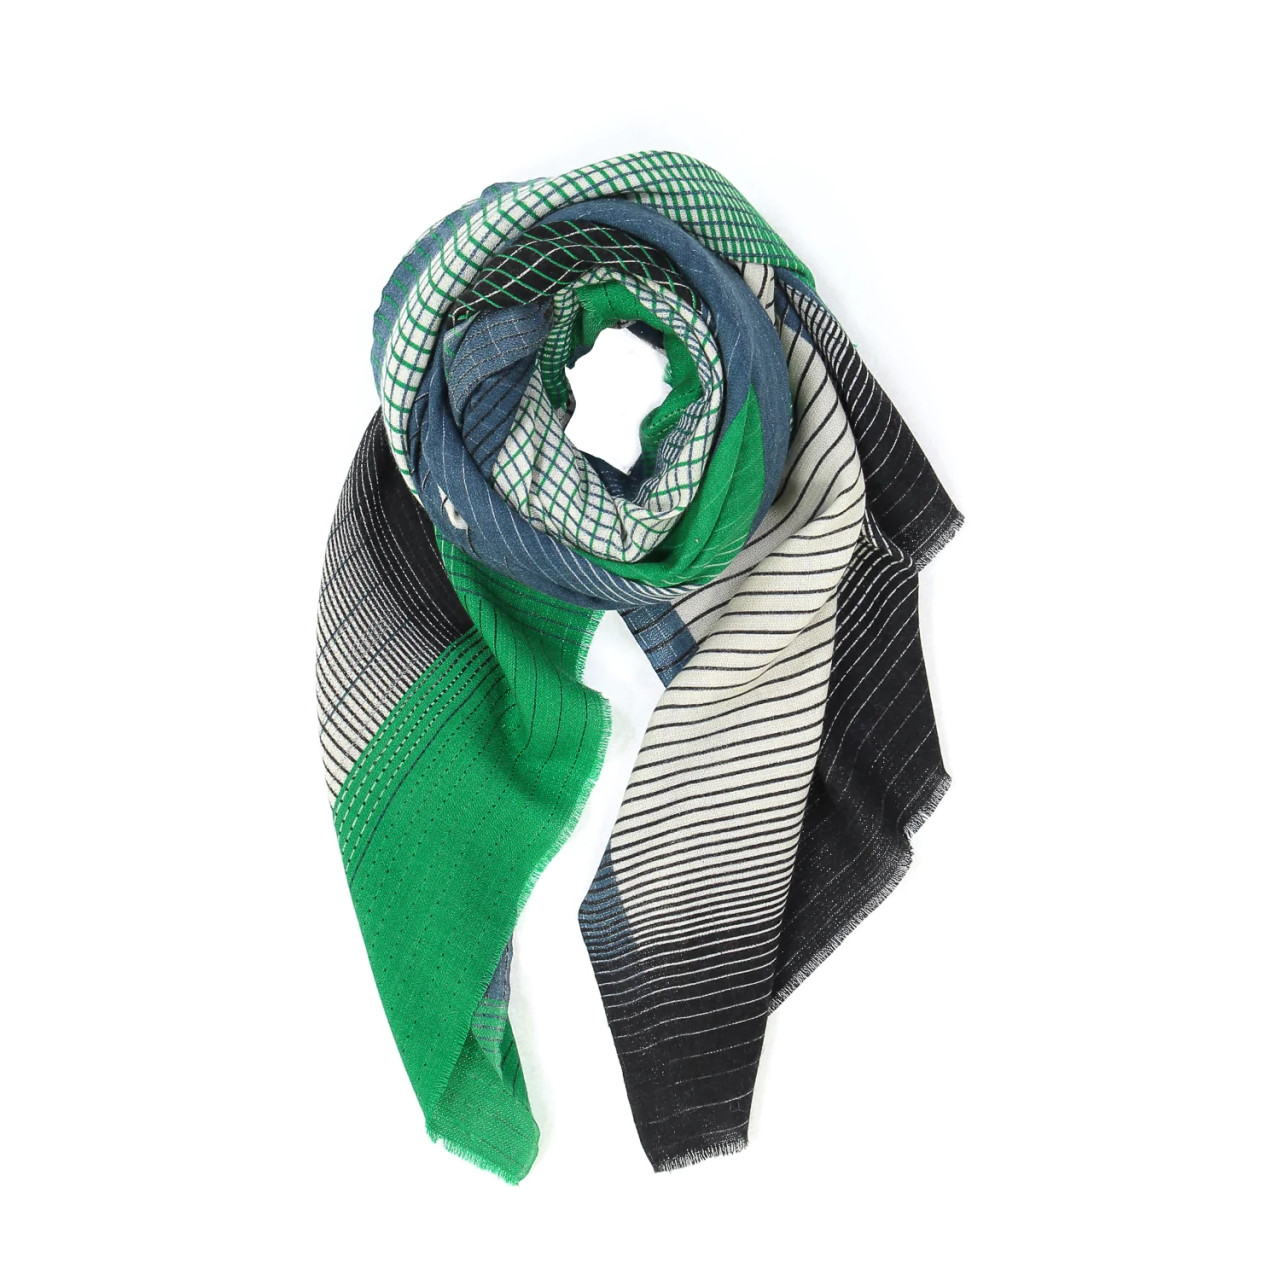 Mapoesie: Emerald Green, Blue Grey and Black Graphic Print Scarf, tomfoolery london